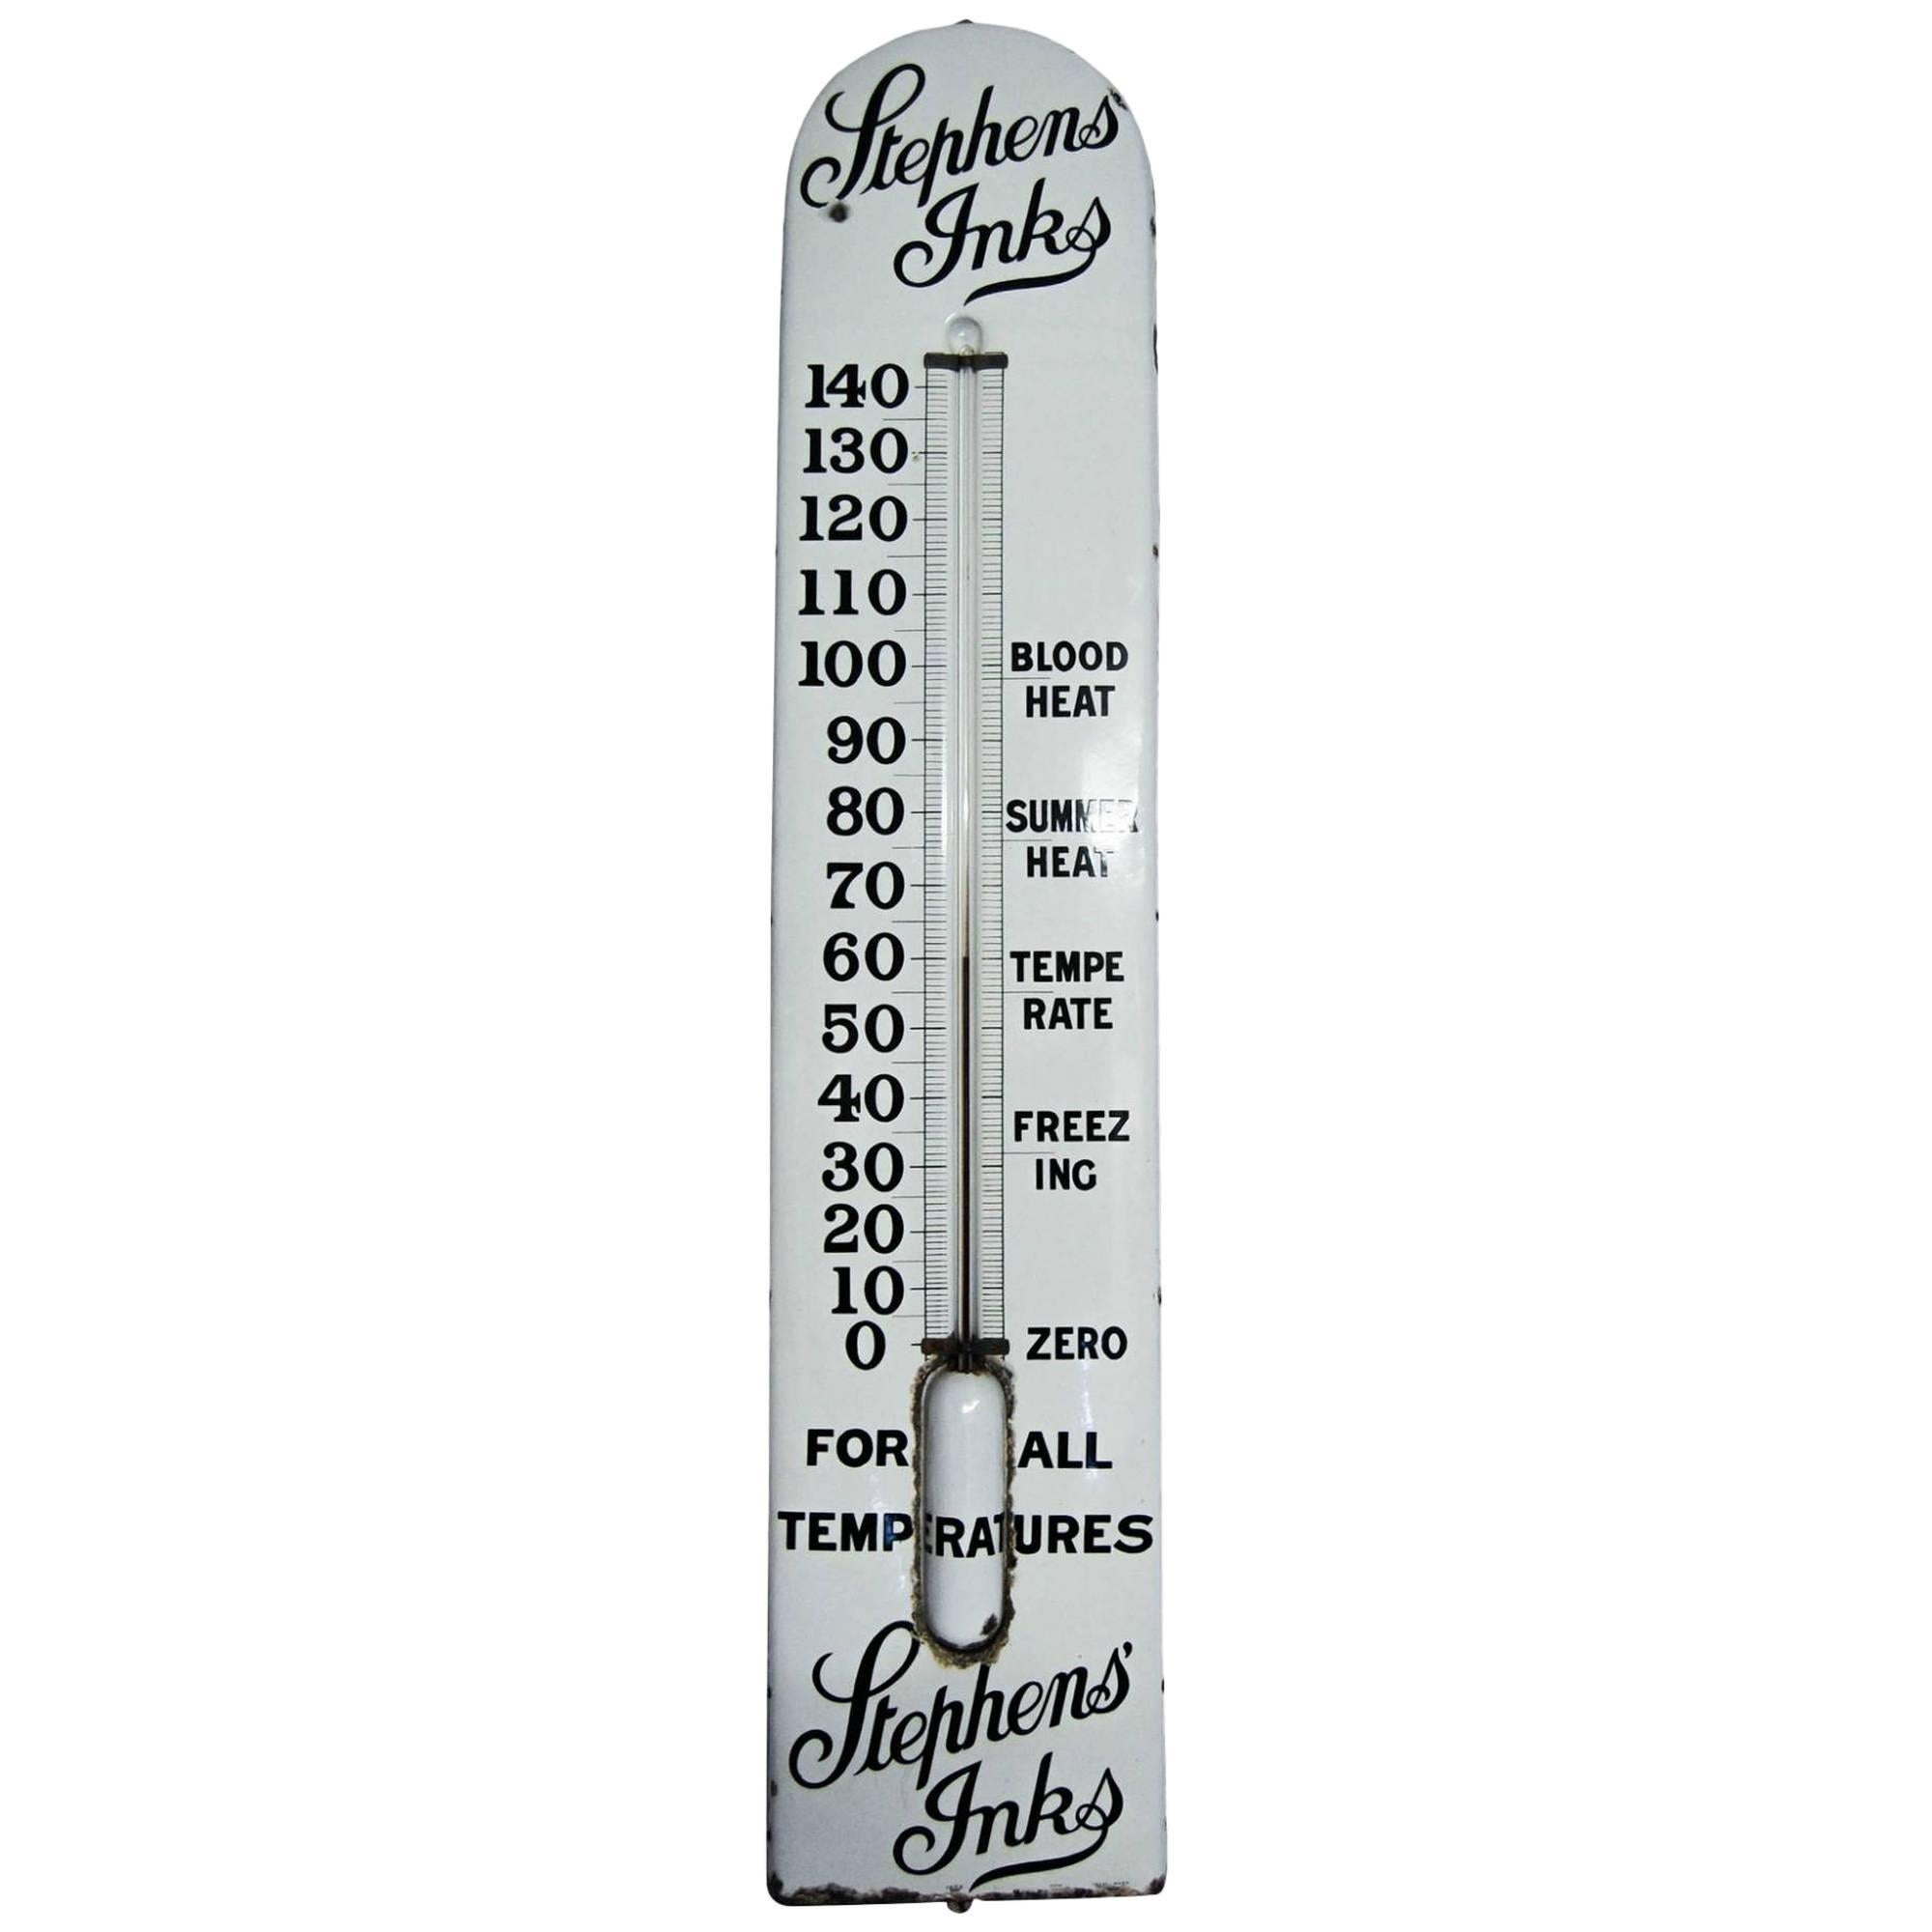 Large Stephens Inks Thermometer Advertising Sign